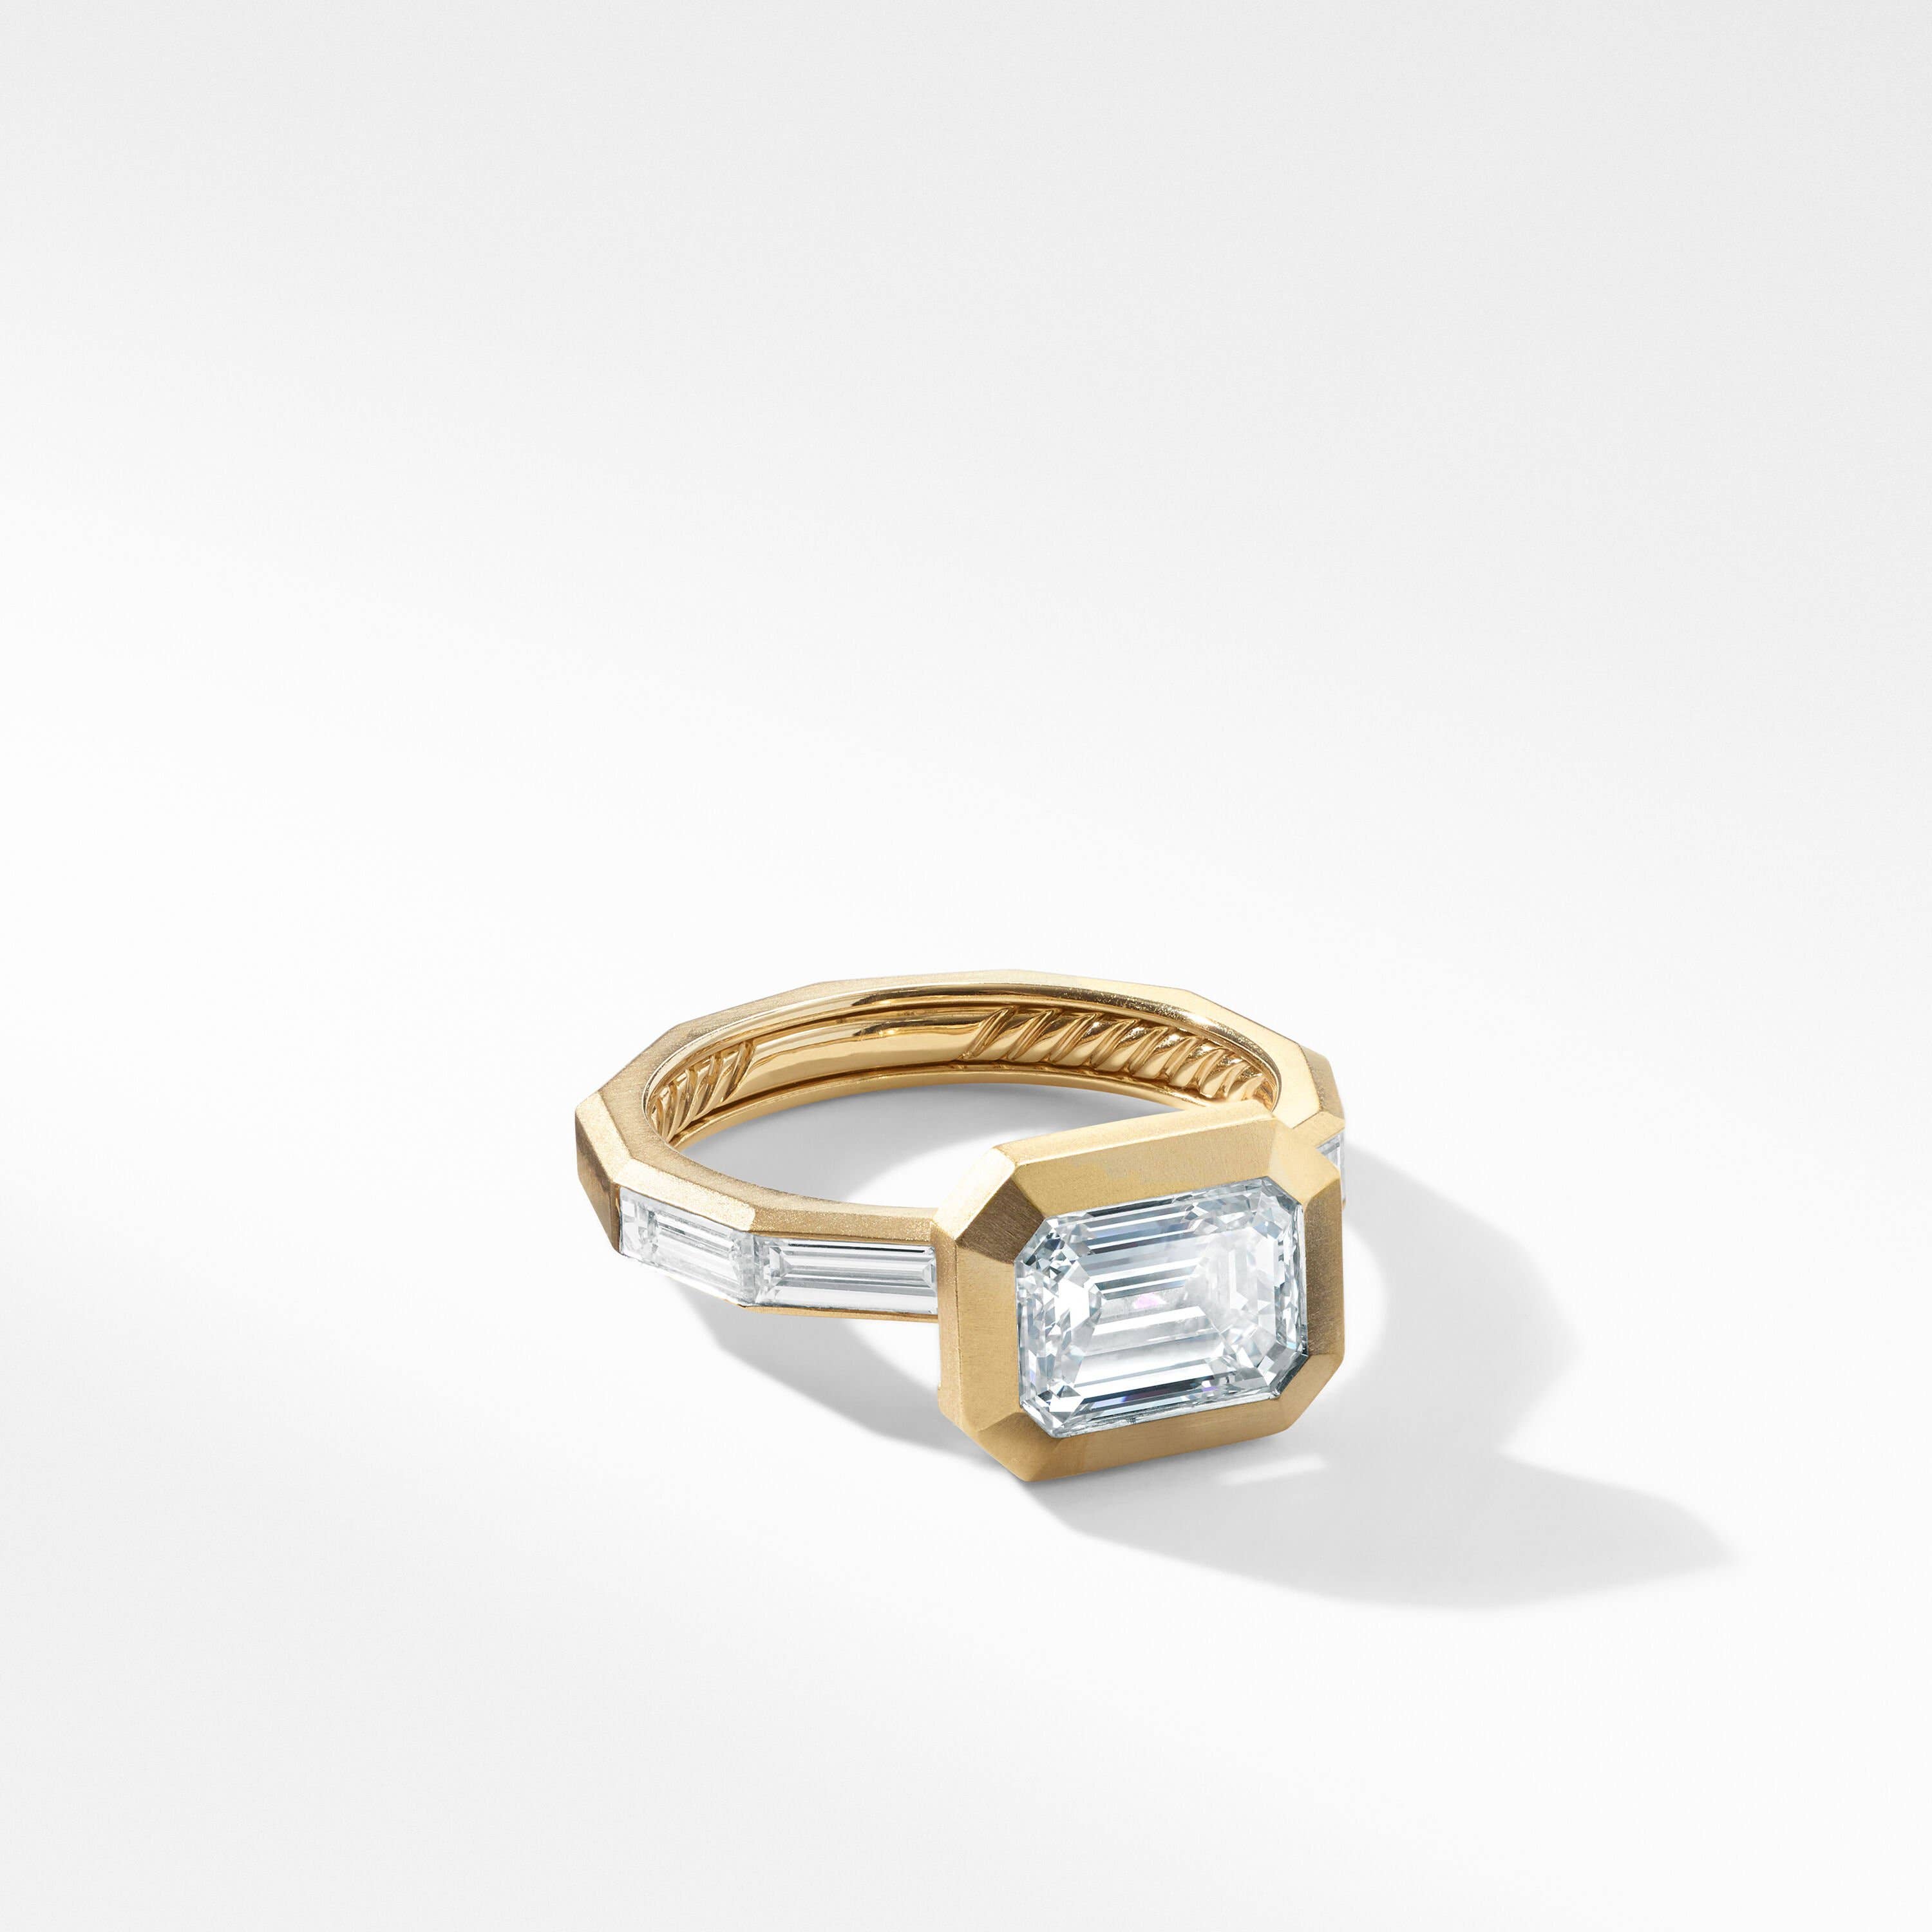 DY Delaunay Engagement Ring in 18K Yellow Gold, Emerald